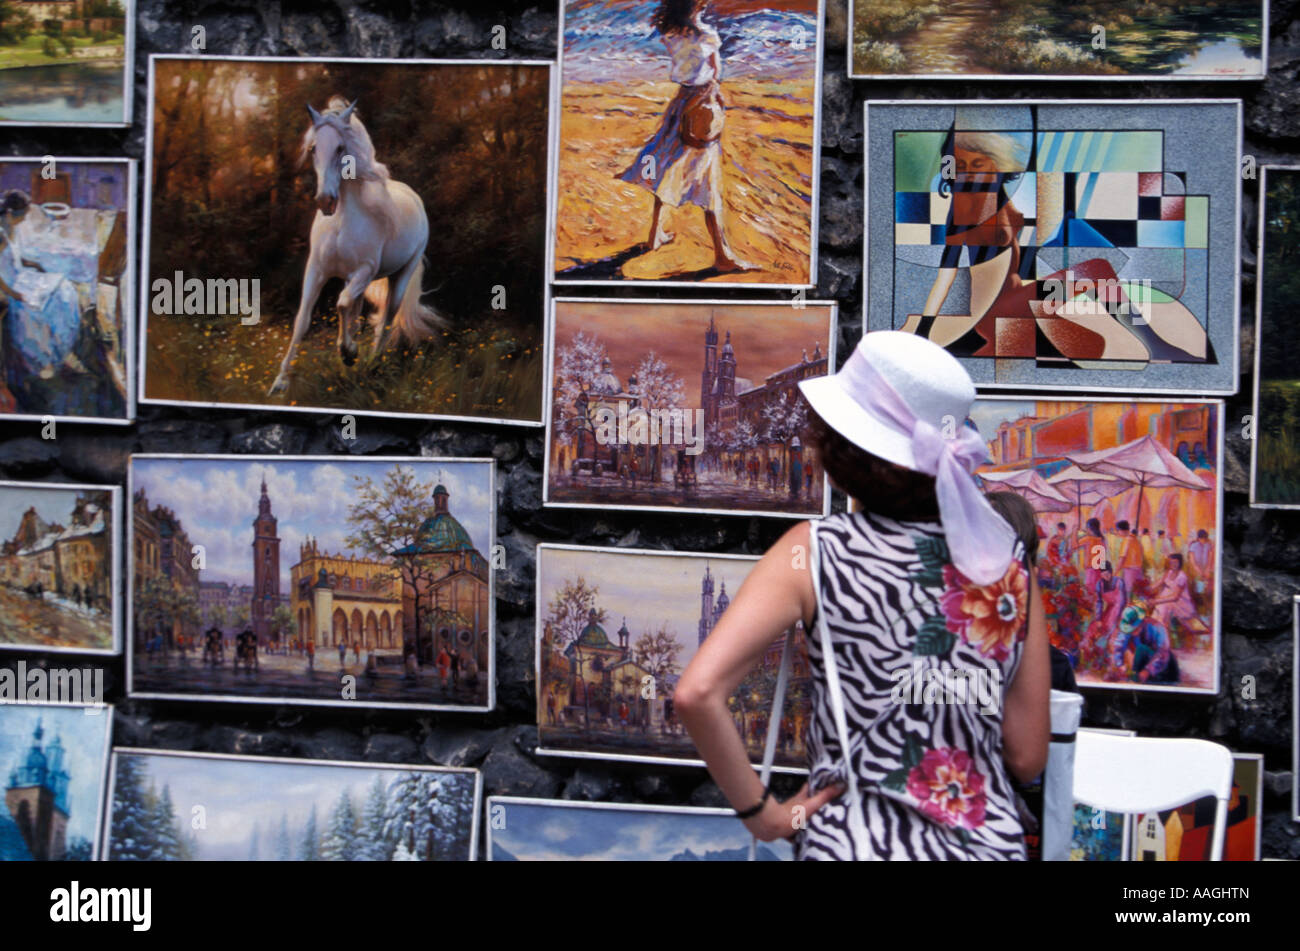 Woman looking at pictures open air gallery Florian s Gate City Wall Cracow Lesser Poland Poland Stock Photo